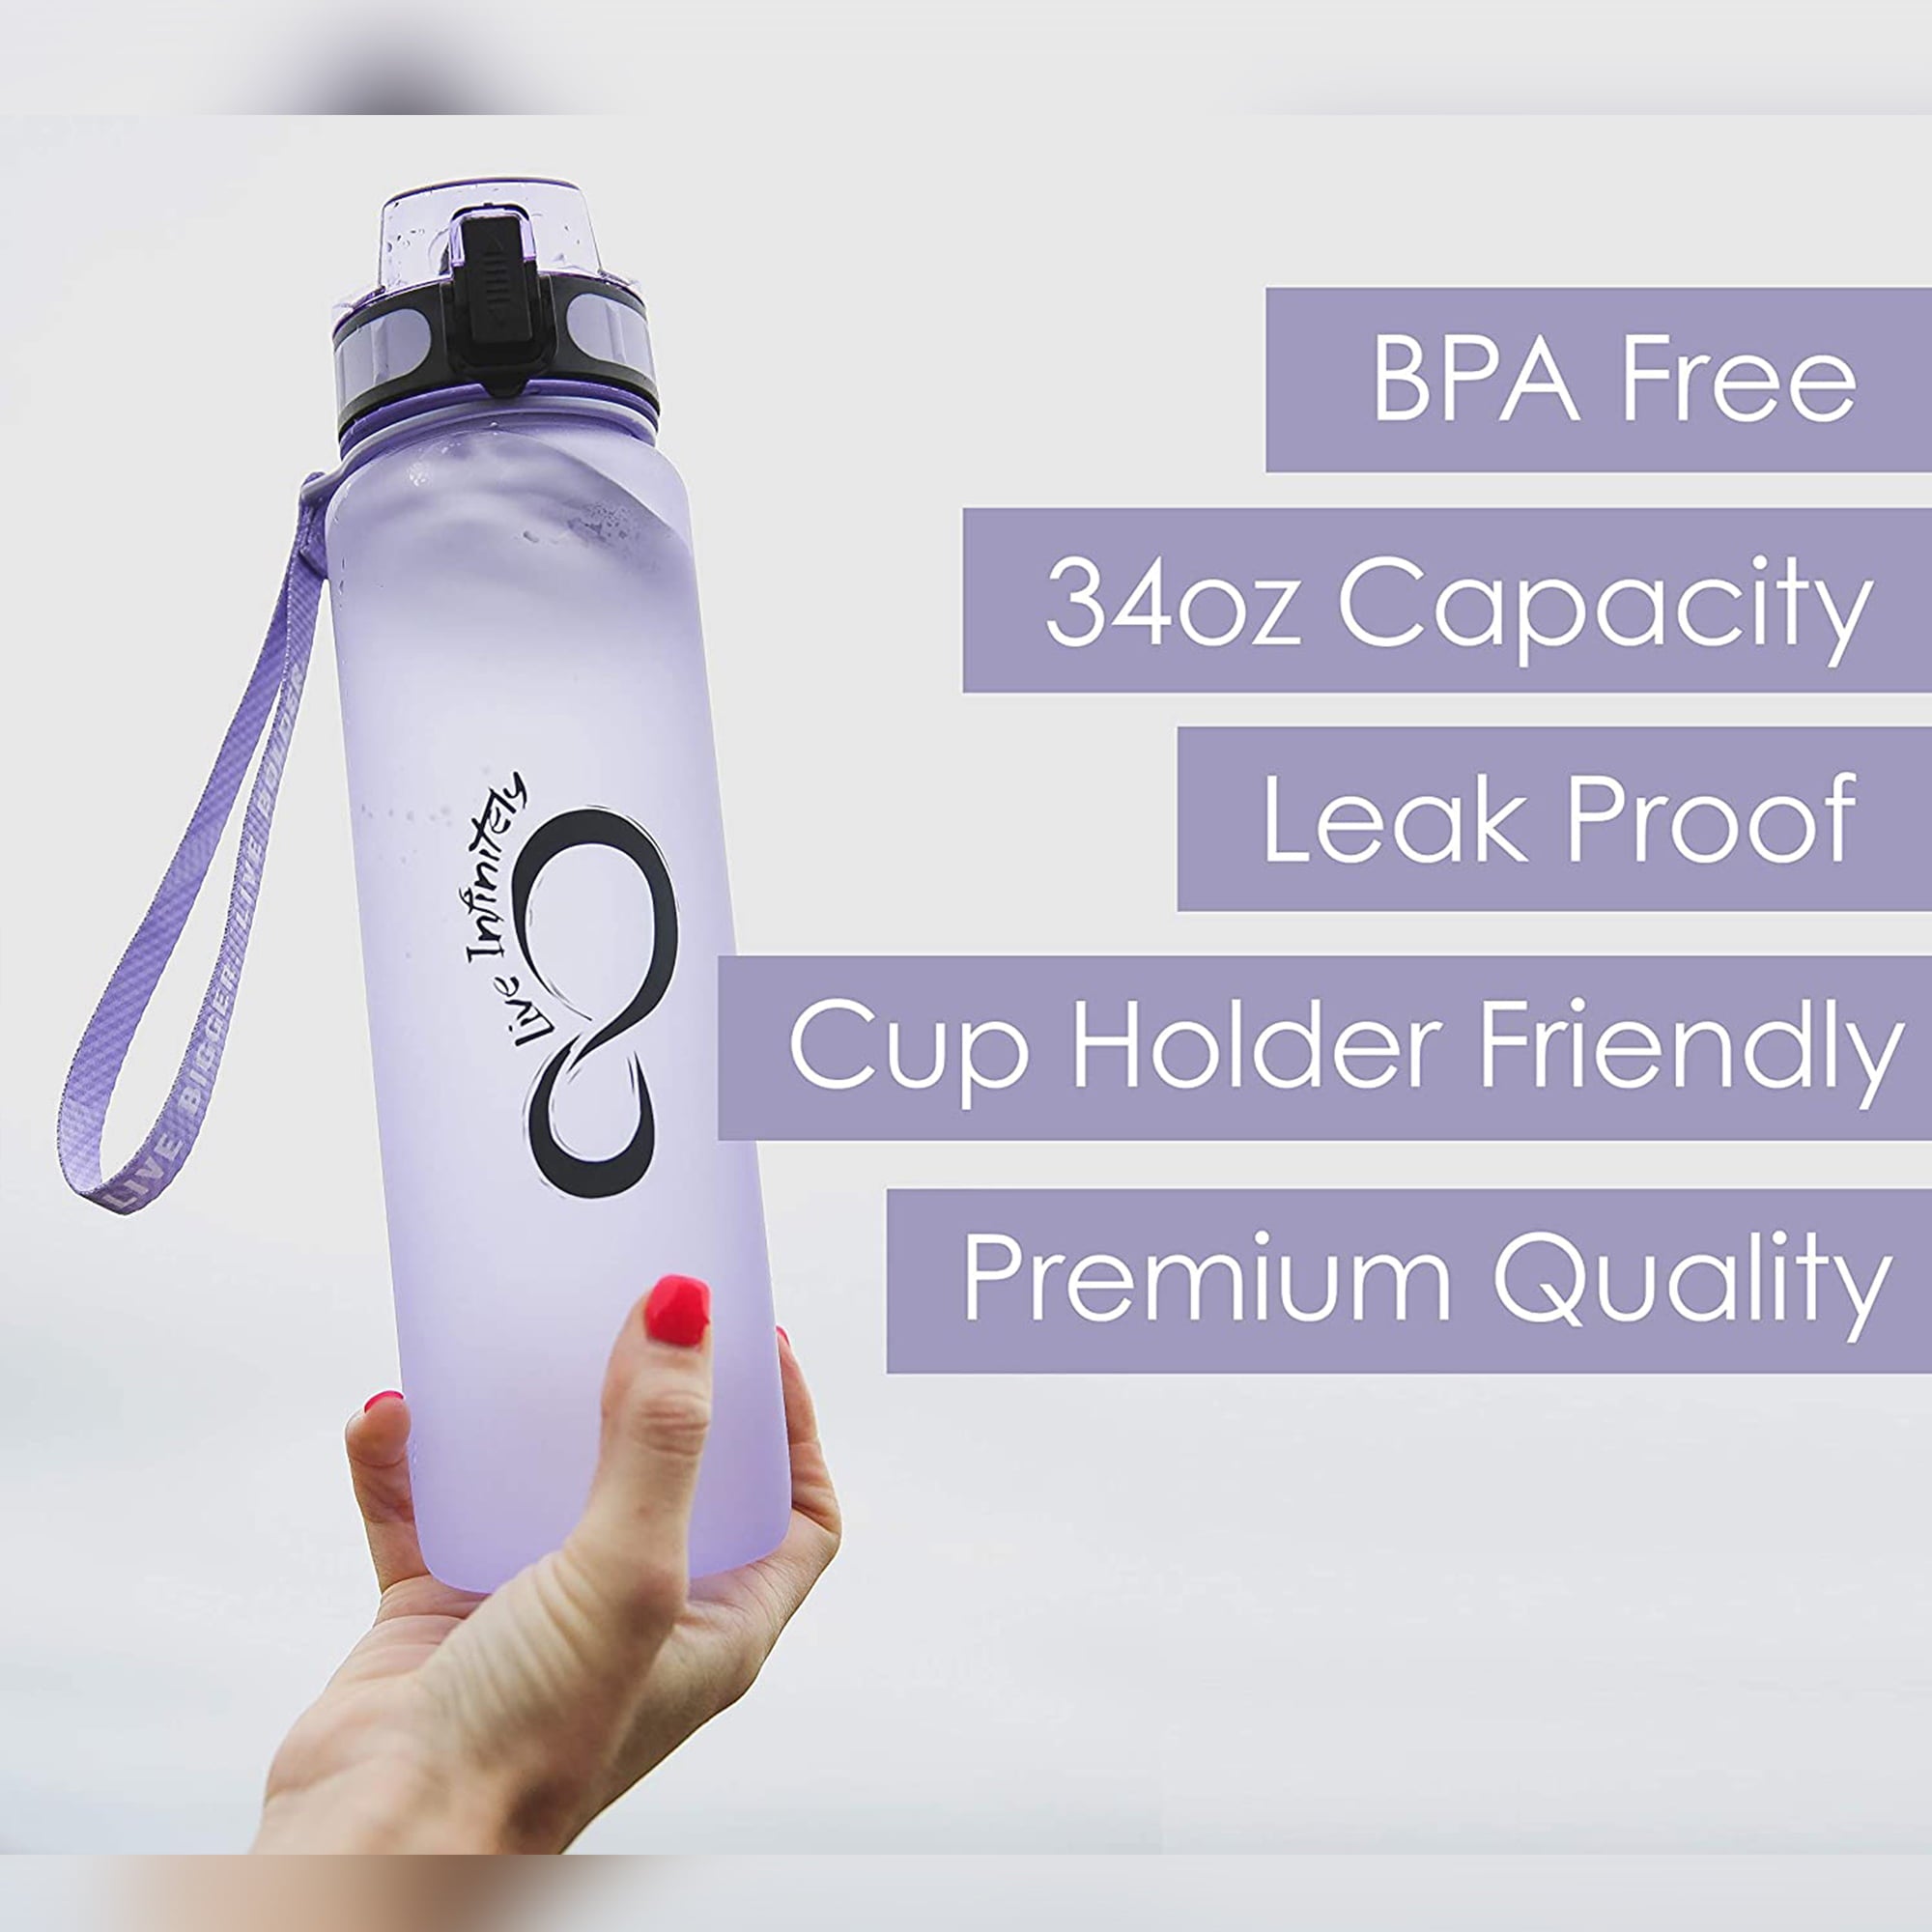 Live Infinitely Gym Water Bottle with Time Marker Fruit Infuser and Shaker 34 Oz Lilac, 50 Pack